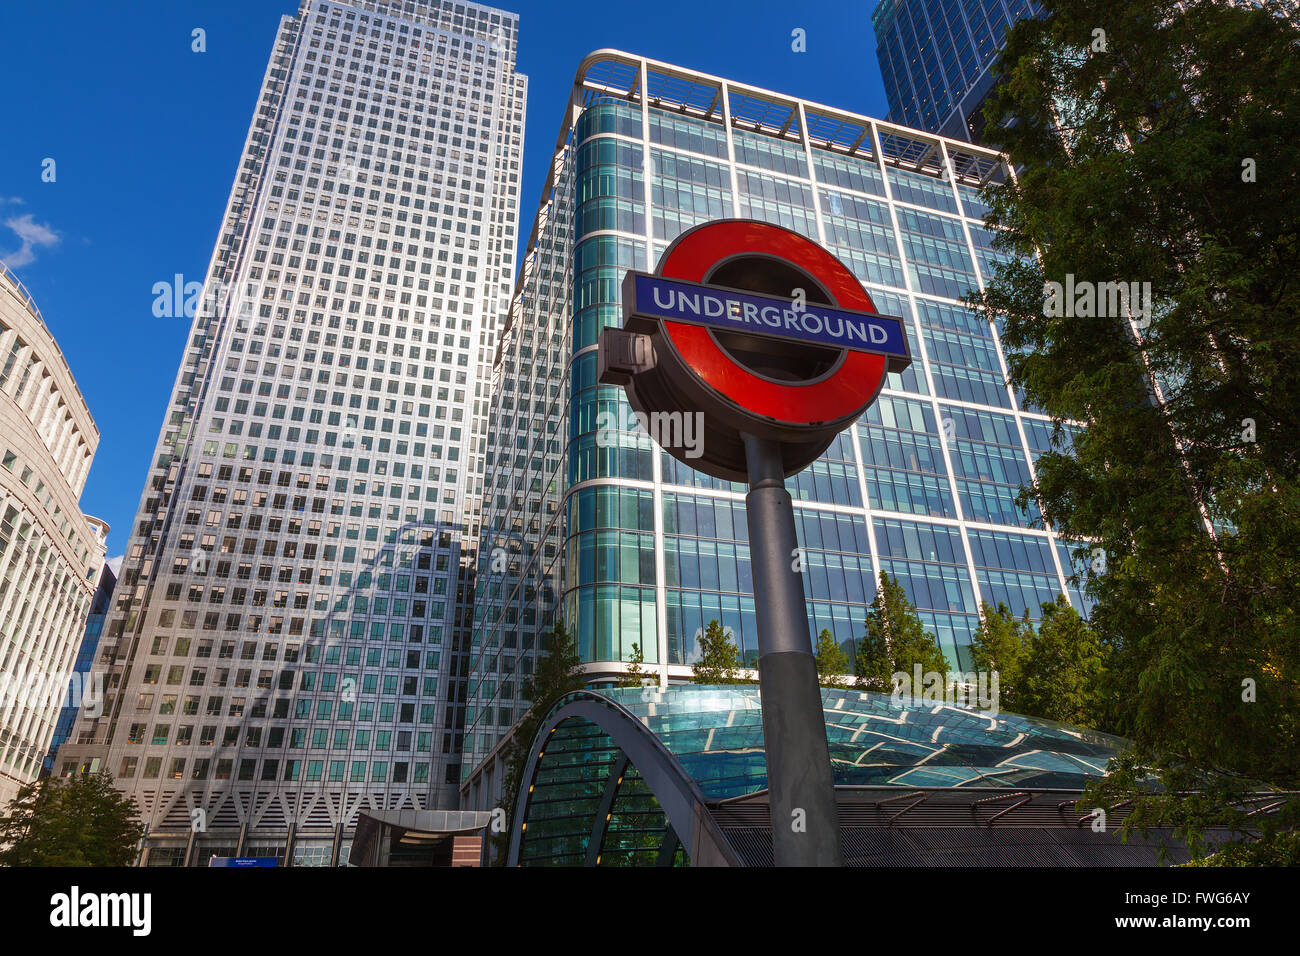 Skyscrapers and London Underground sign at Canary Wharf, Docklands the heart of the financial district of London Stock Photo